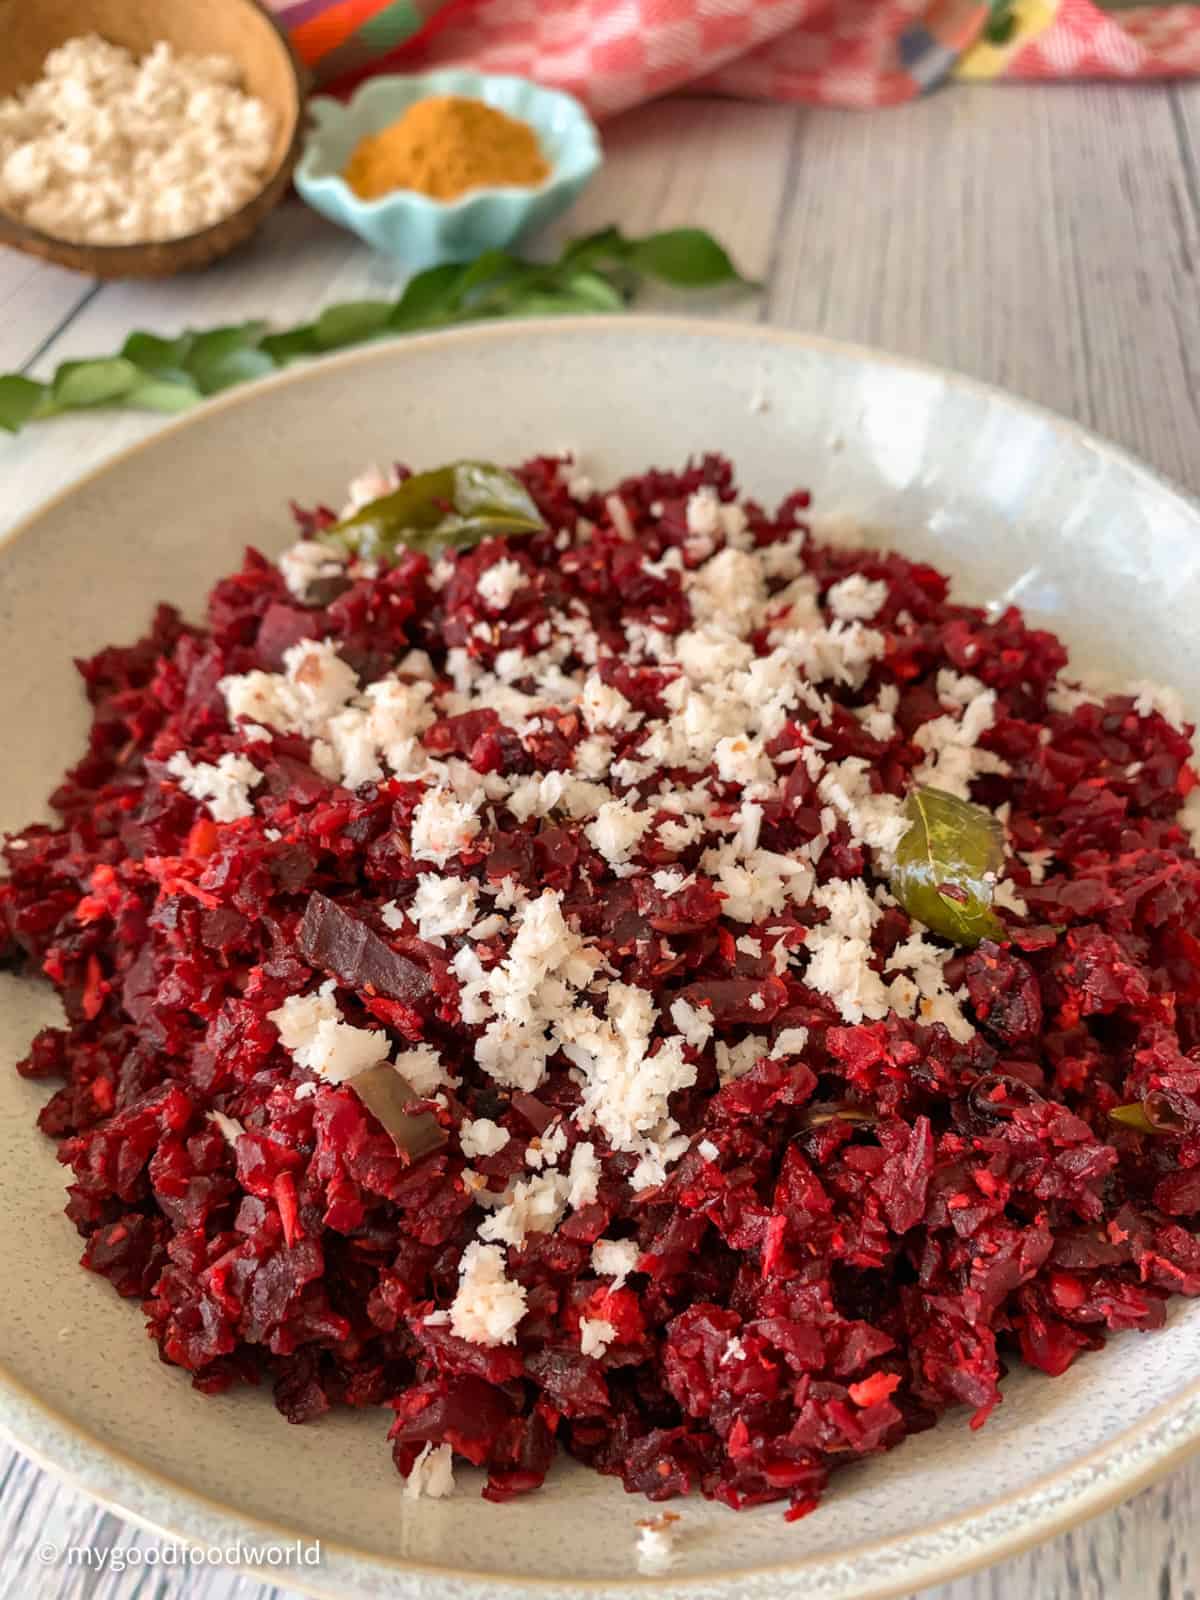 Beetroot sauteed in spices and topped with freshly grated coconut is placed in a round white bowl.